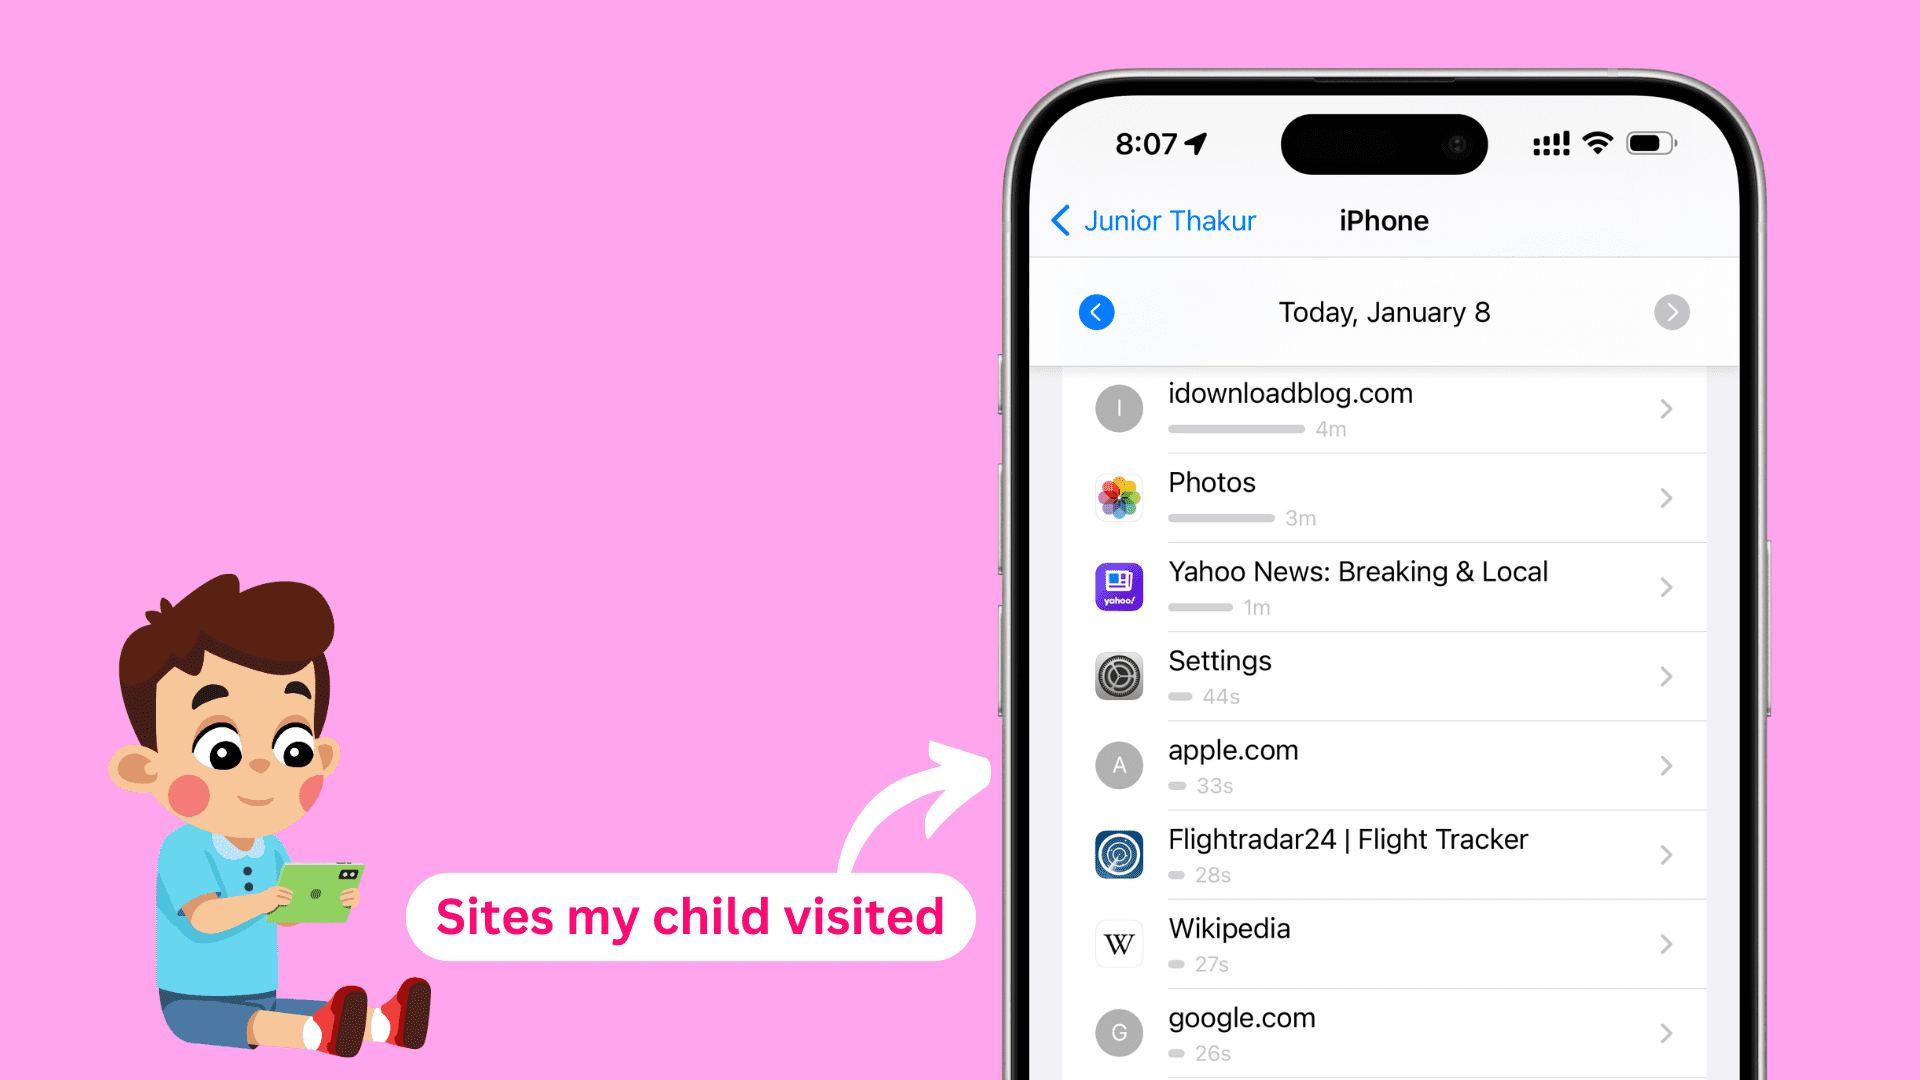 Using my iPhone to see websites my child visited on their device